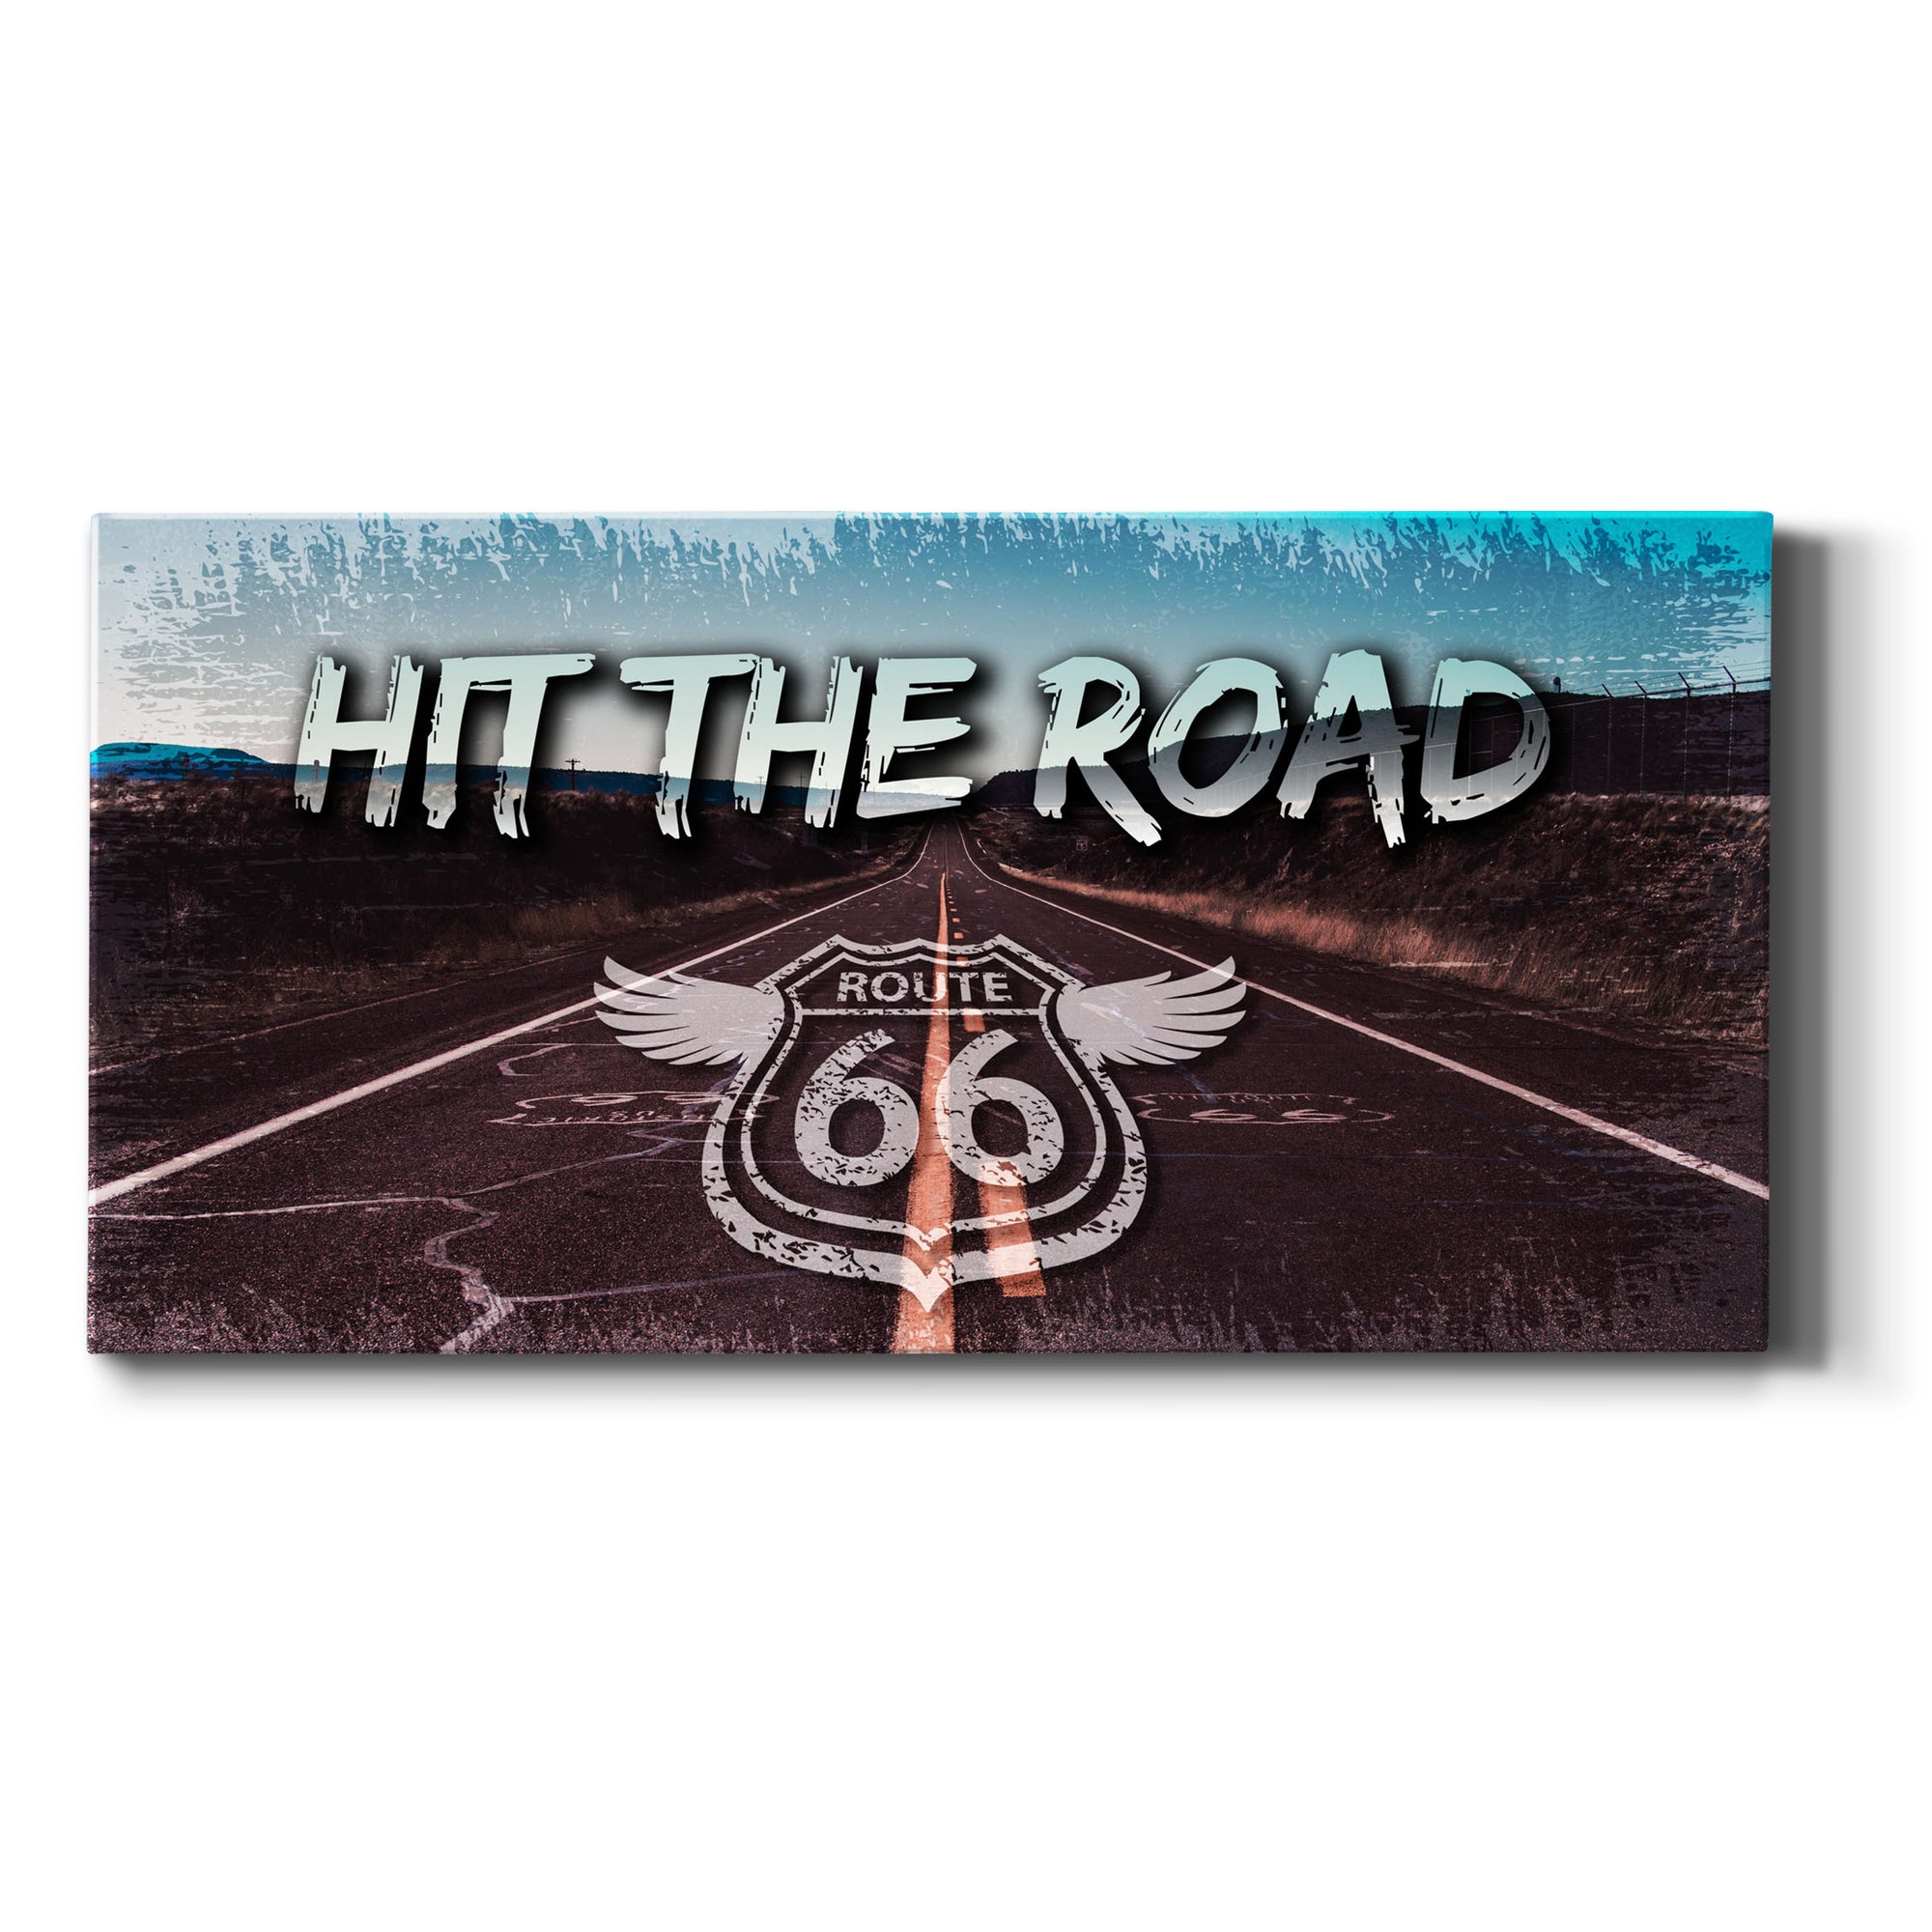 Hit the road- Route 66